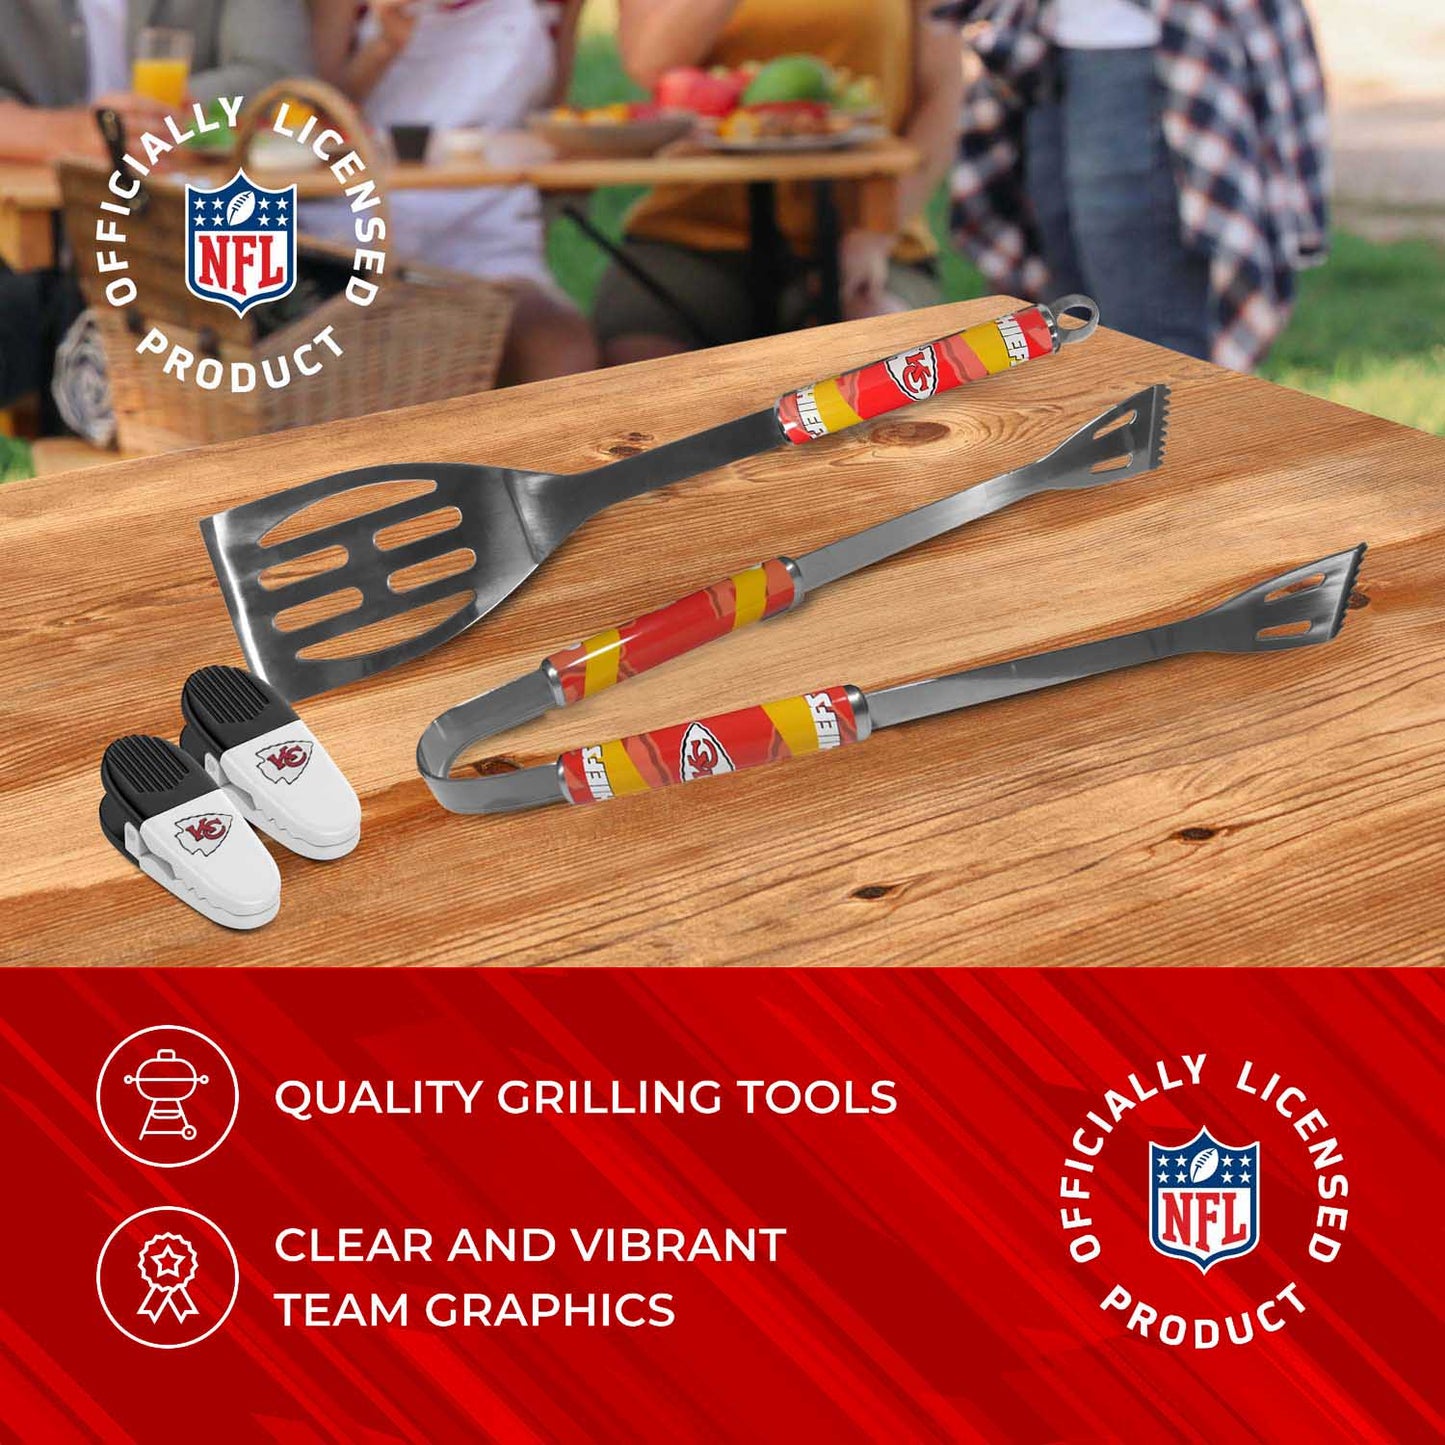 Kansas City Chiefs NFL Two Piece Grilling Tools Set with 2 Magnet Chip Clips - Chrome